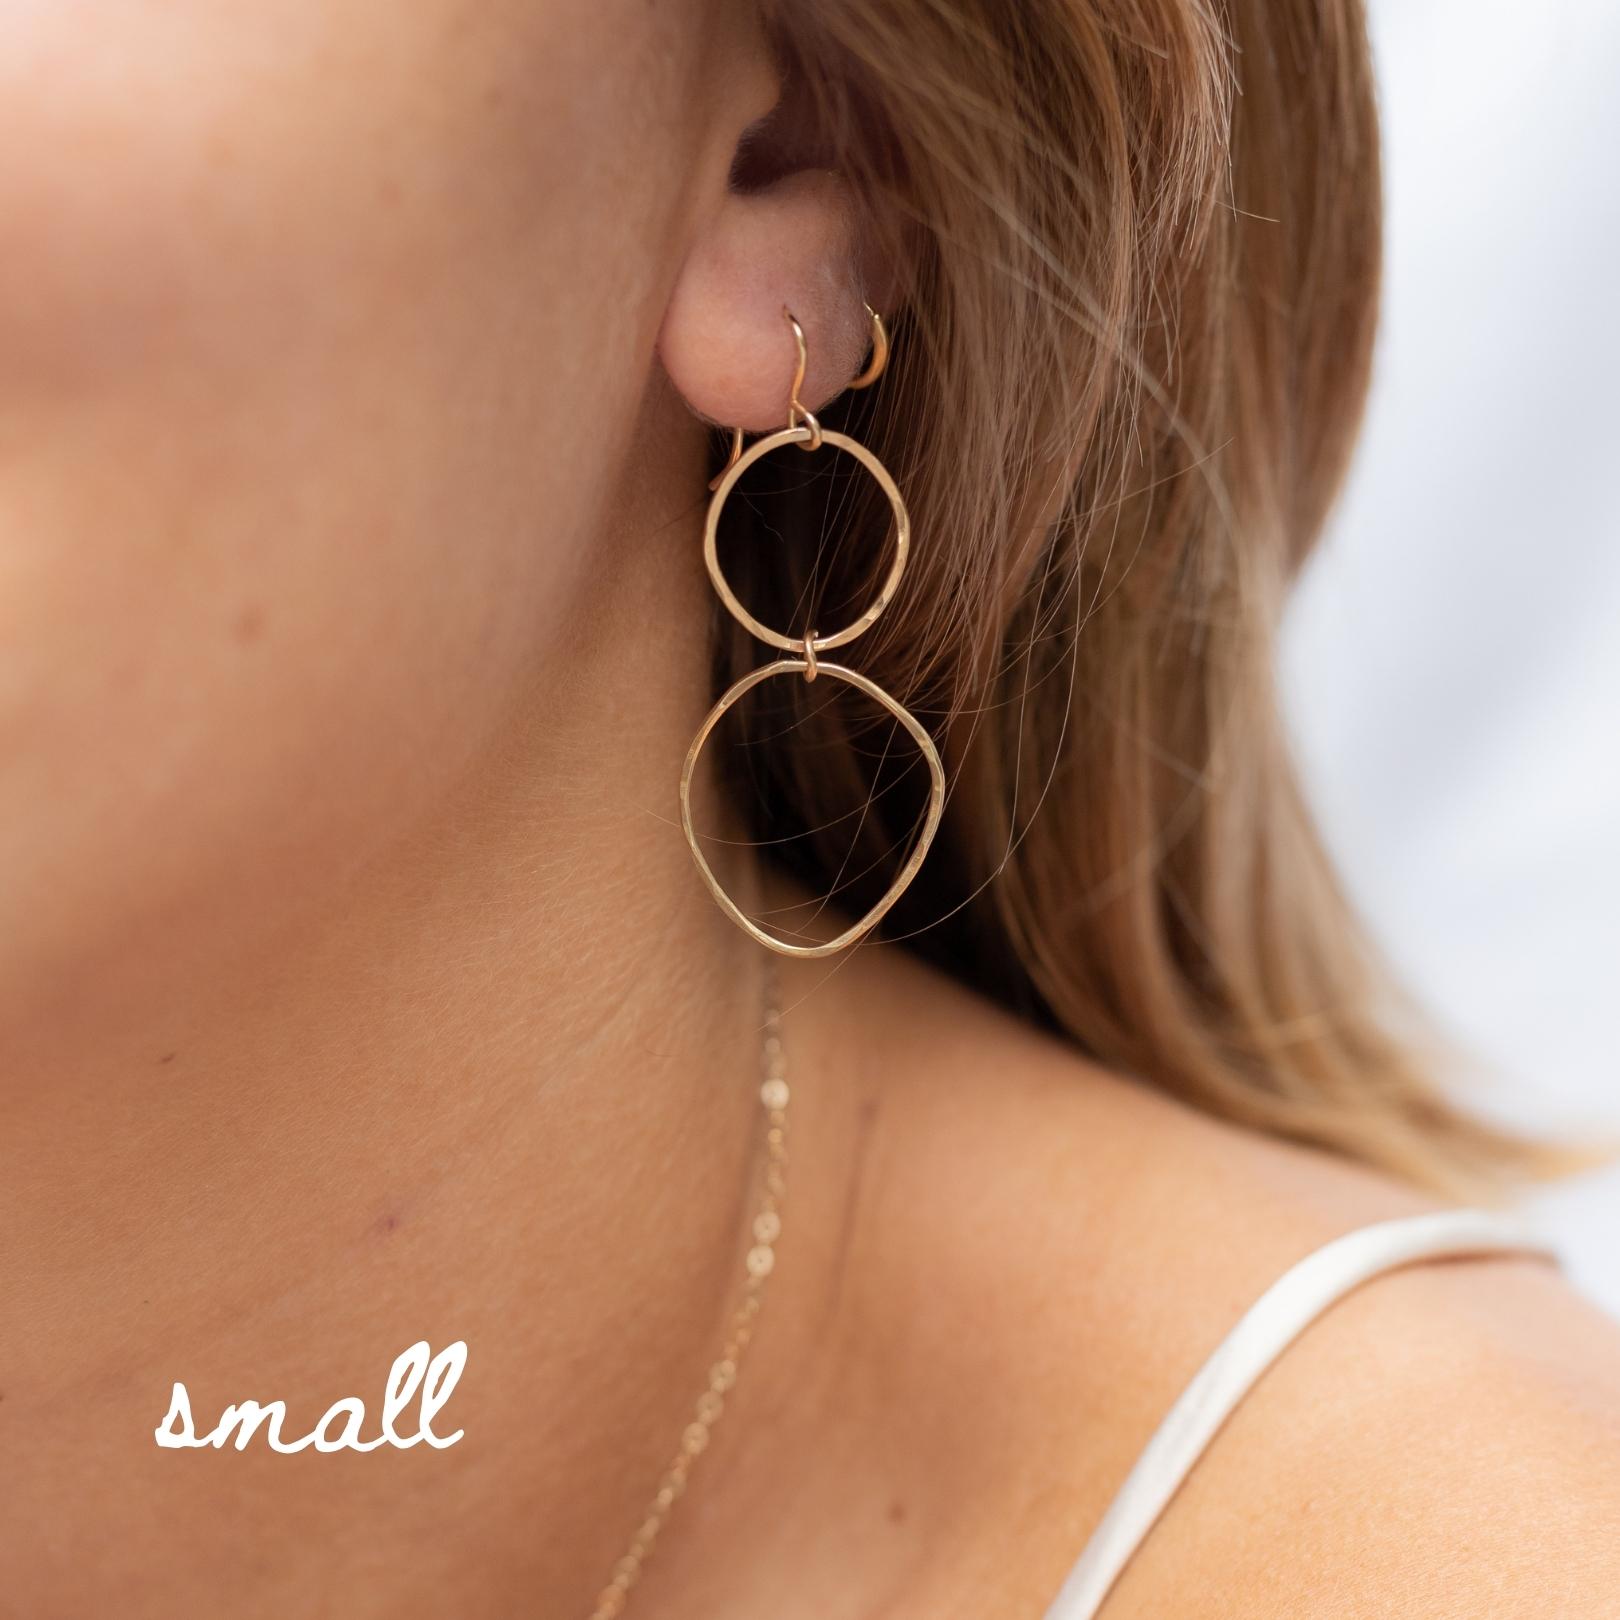 Hammered gold filled double hoop earrings. Three different sizes. Small: about 1.5 inches. Shown in a woman's ear. 